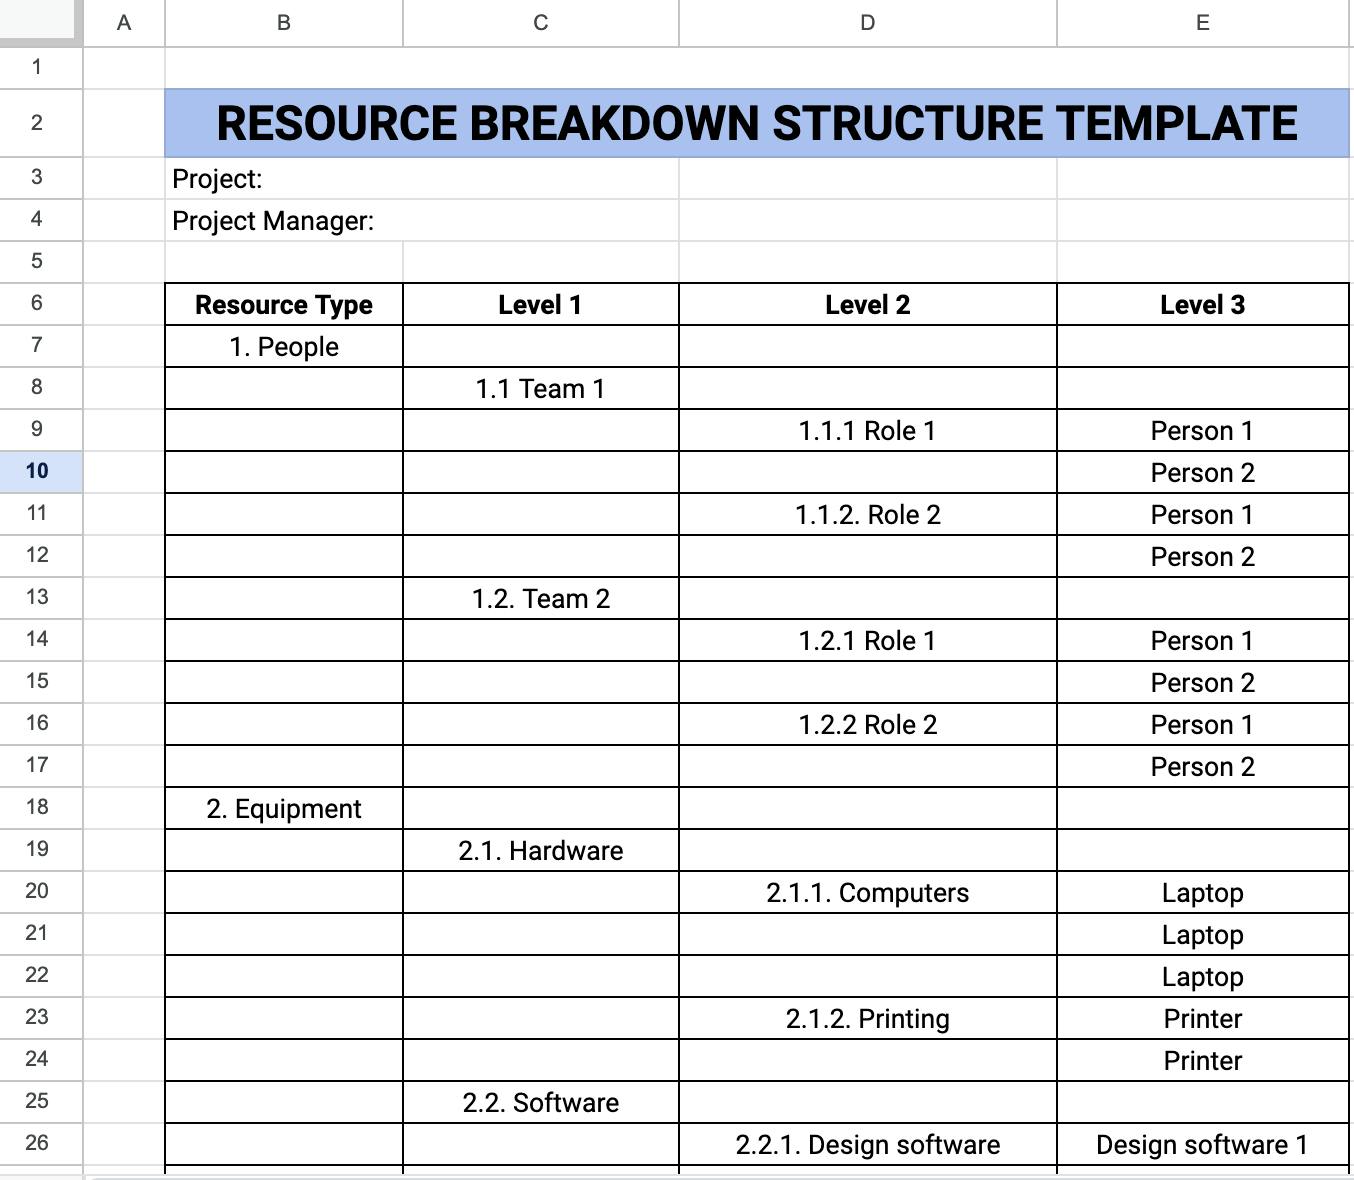 A template for resource requirements